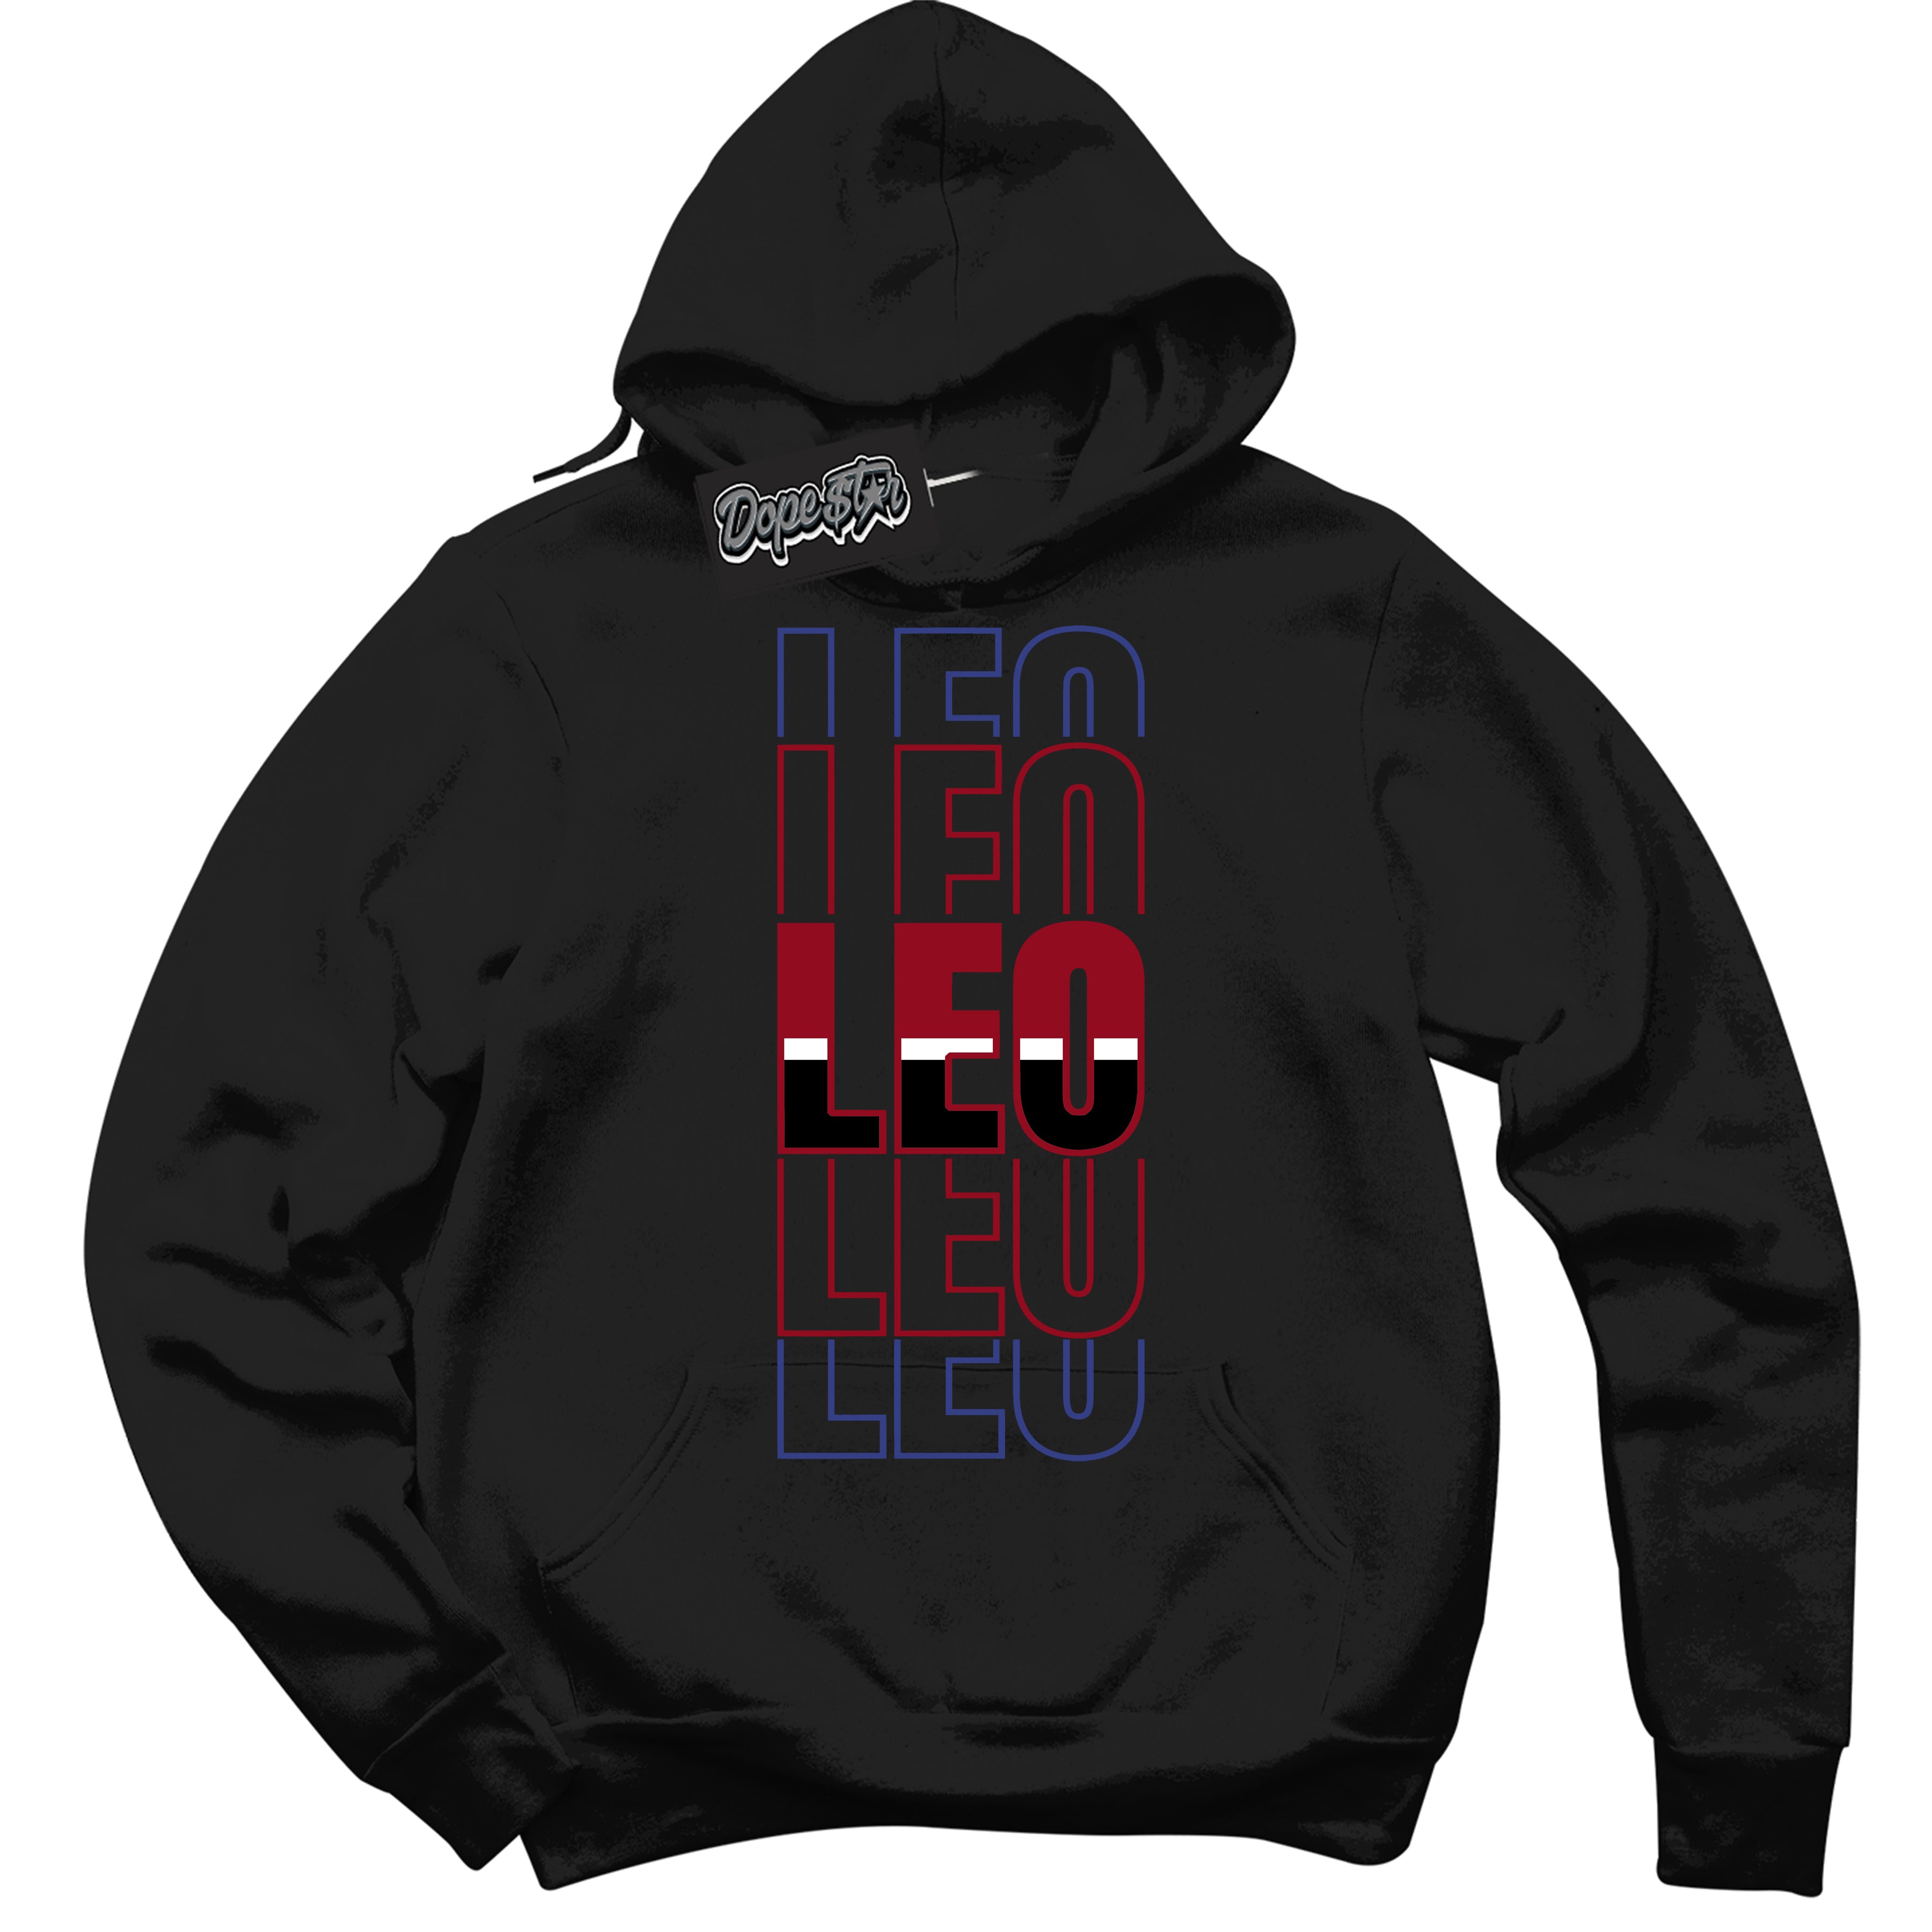 Cool Black Hoodie with “ Leo ”  design that Perfectly Matches Playoffs 8s Sneakers.